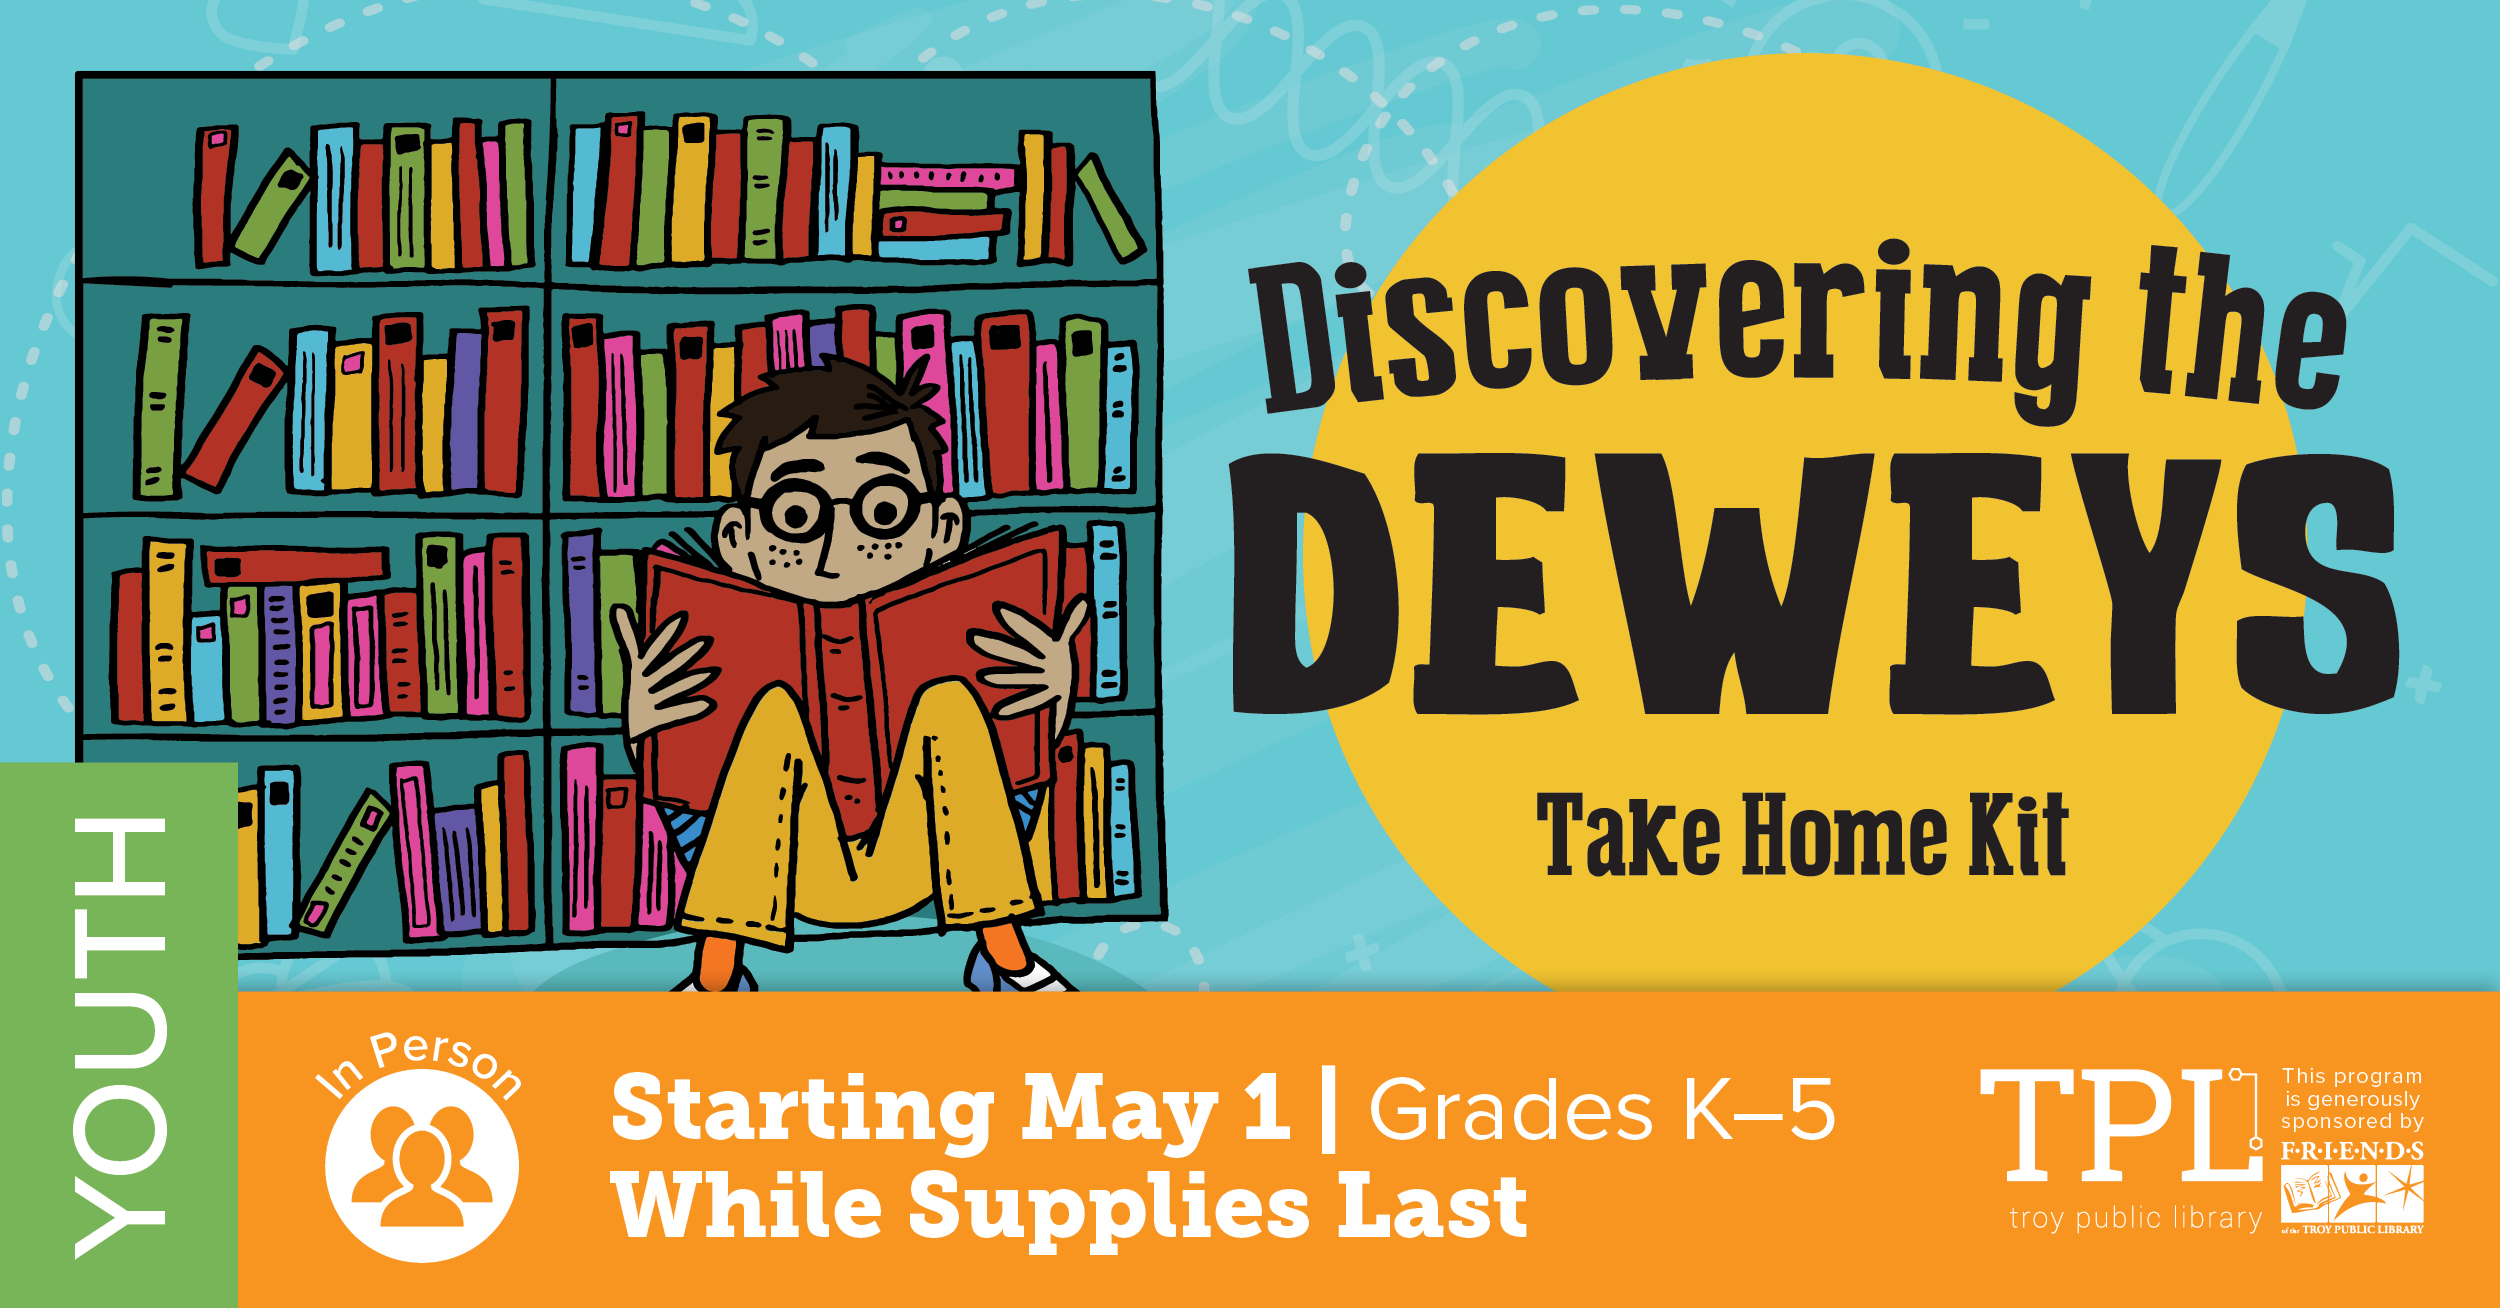 Discovering the Deweys Take Home Kit. In Person pickup starting May 1st while supplies last for grades kindergarten to 5th. Sponsored by the Friends of the Troy Public Library.